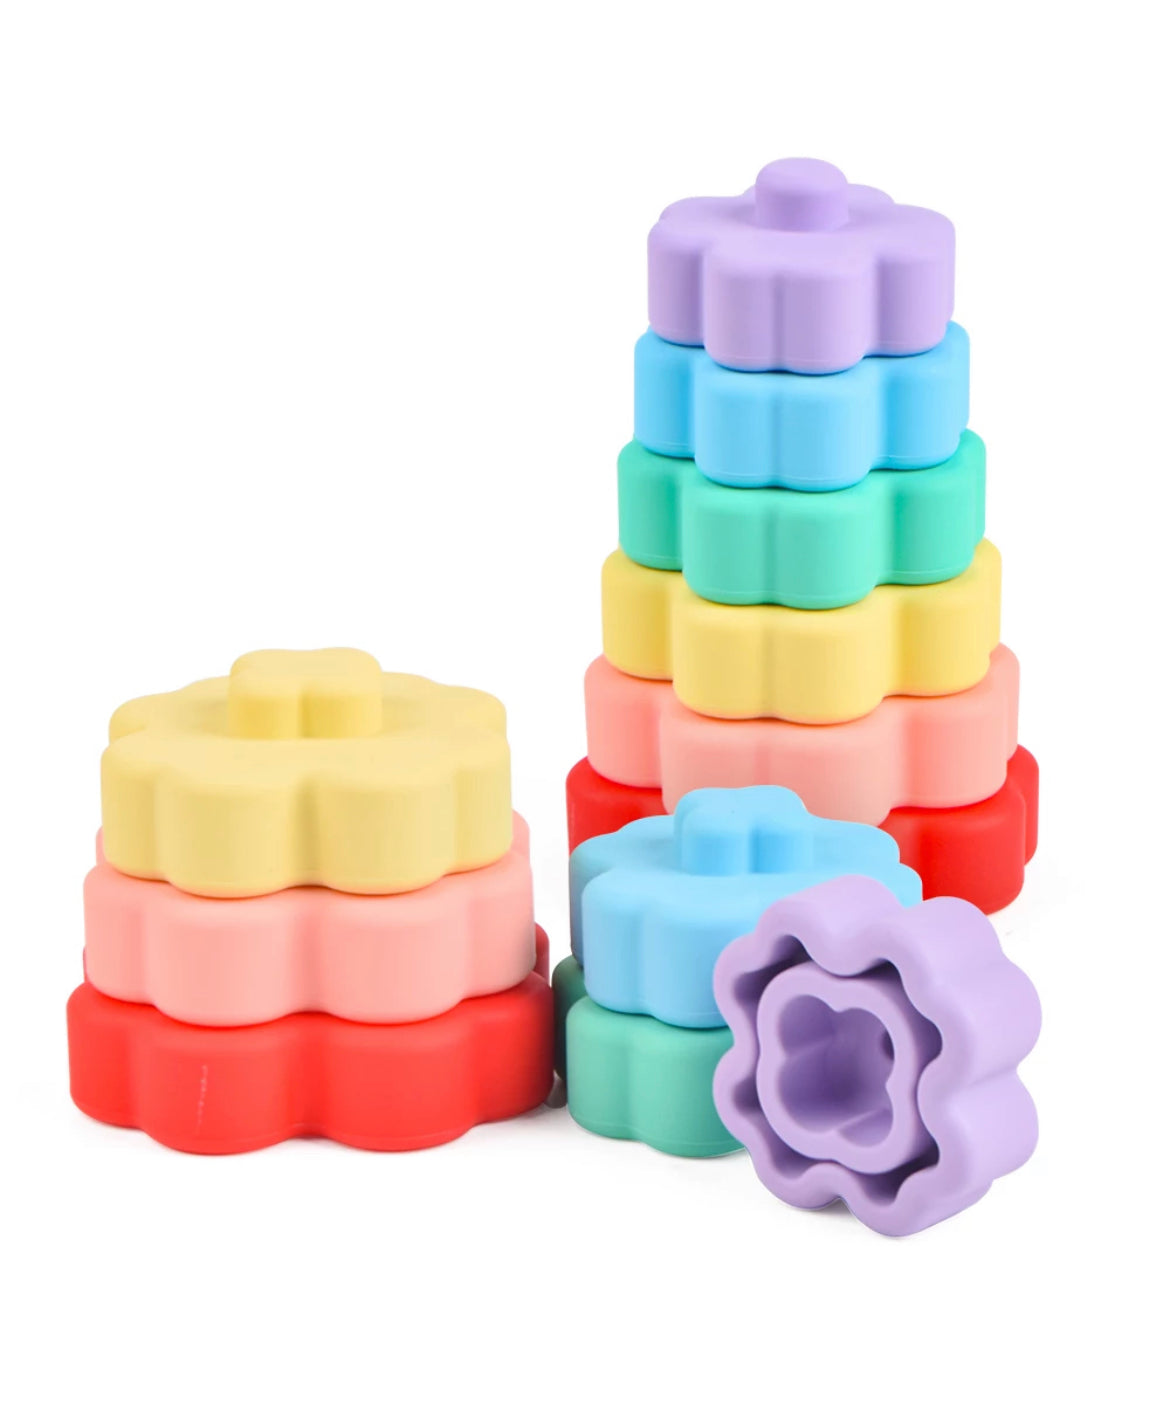 Baby Silicone Stacking Rings - Nestor Avenue, rainbow and rustic